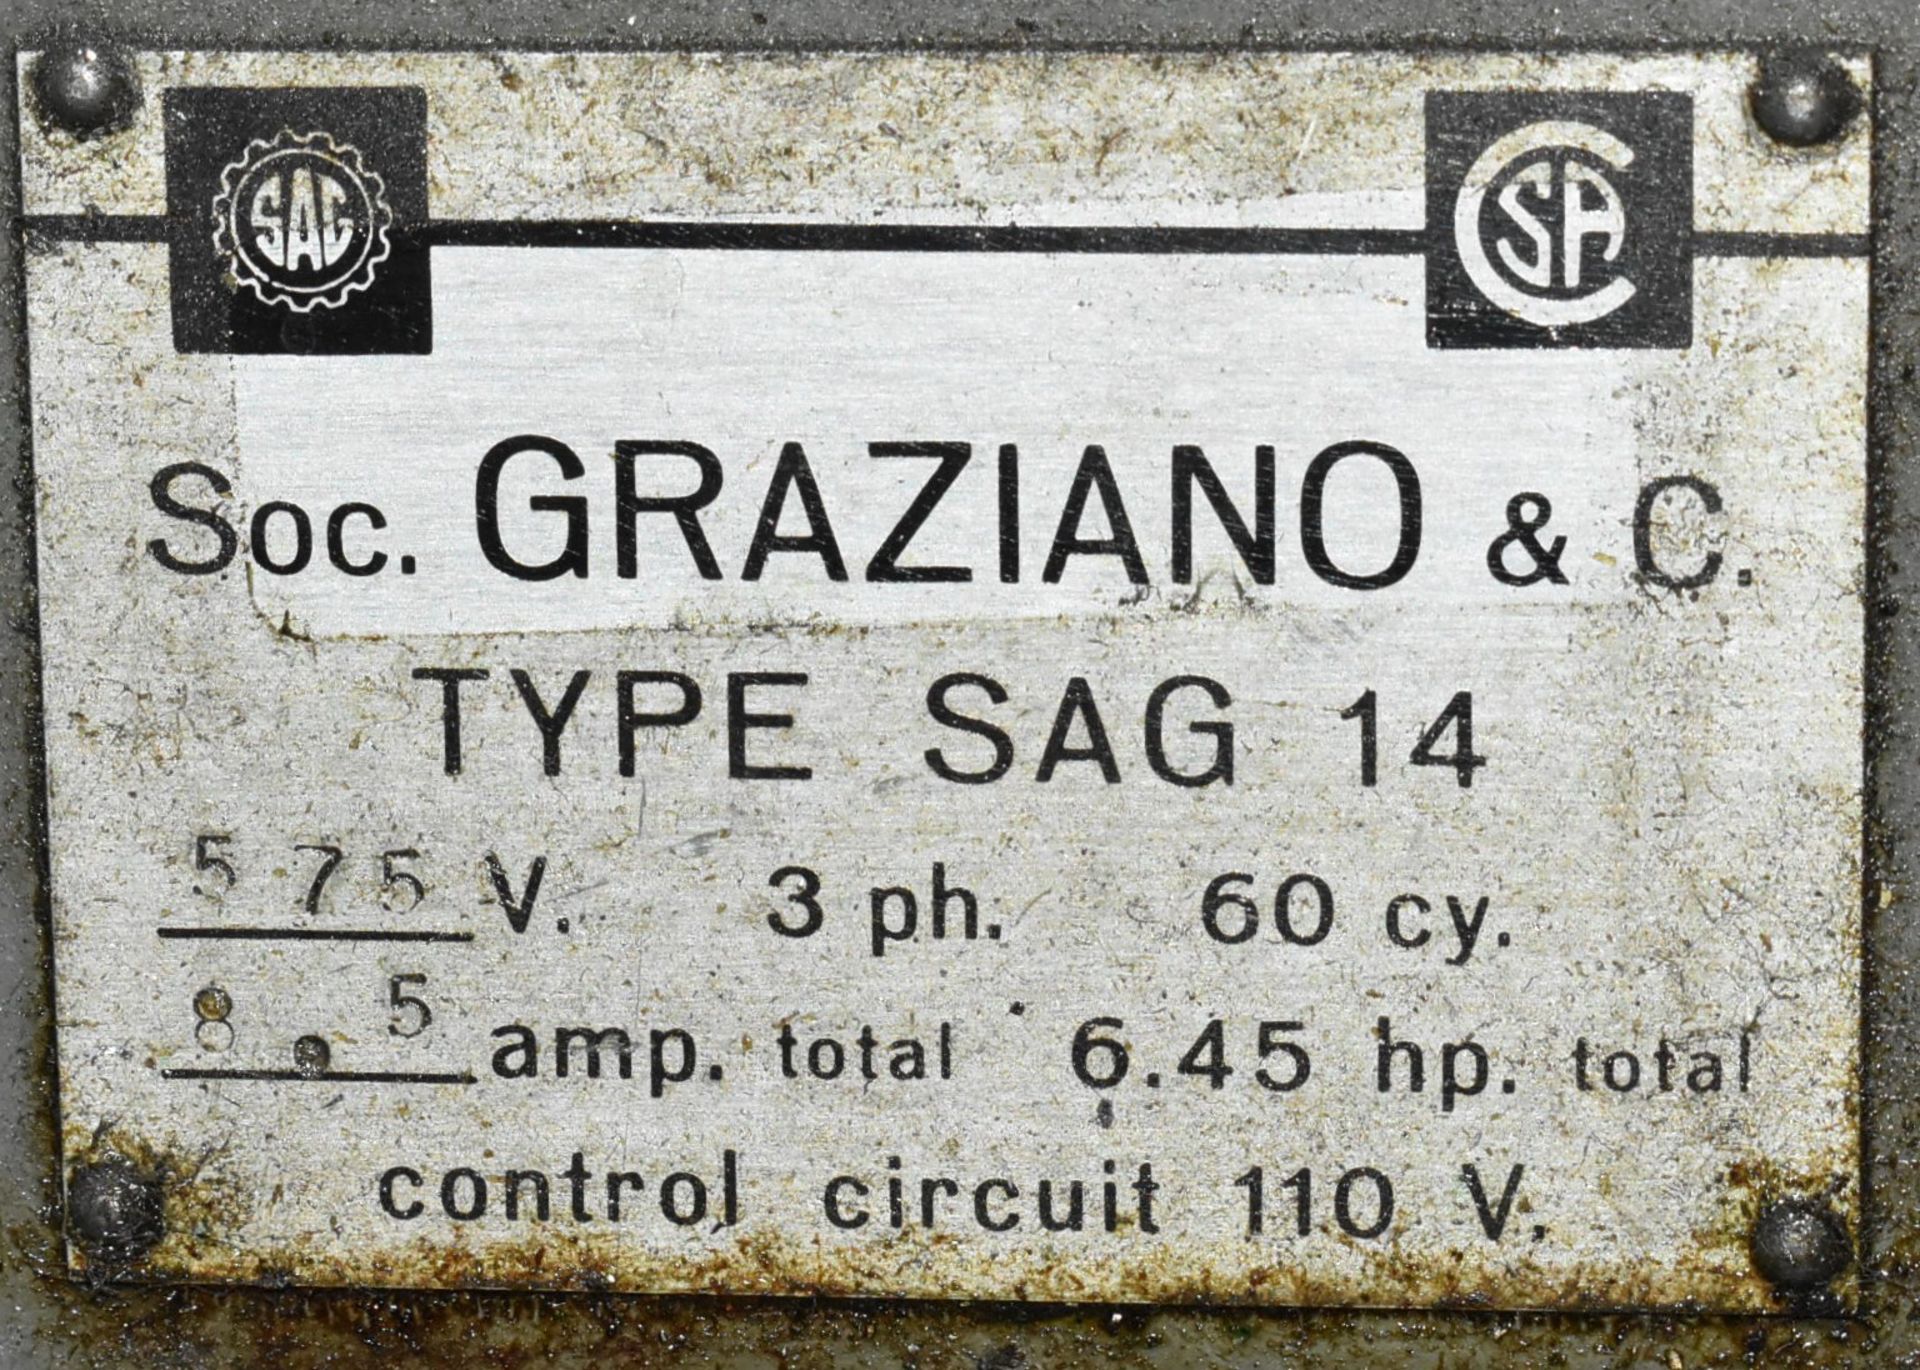 GRAZIANO TORTONA SAG 17 ENGINE LATHE WITH 8" 3-JAW CHUCK, 20" SWING, 52" BETWEEN CENTERS, 2" SPINDLE - Image 8 of 10